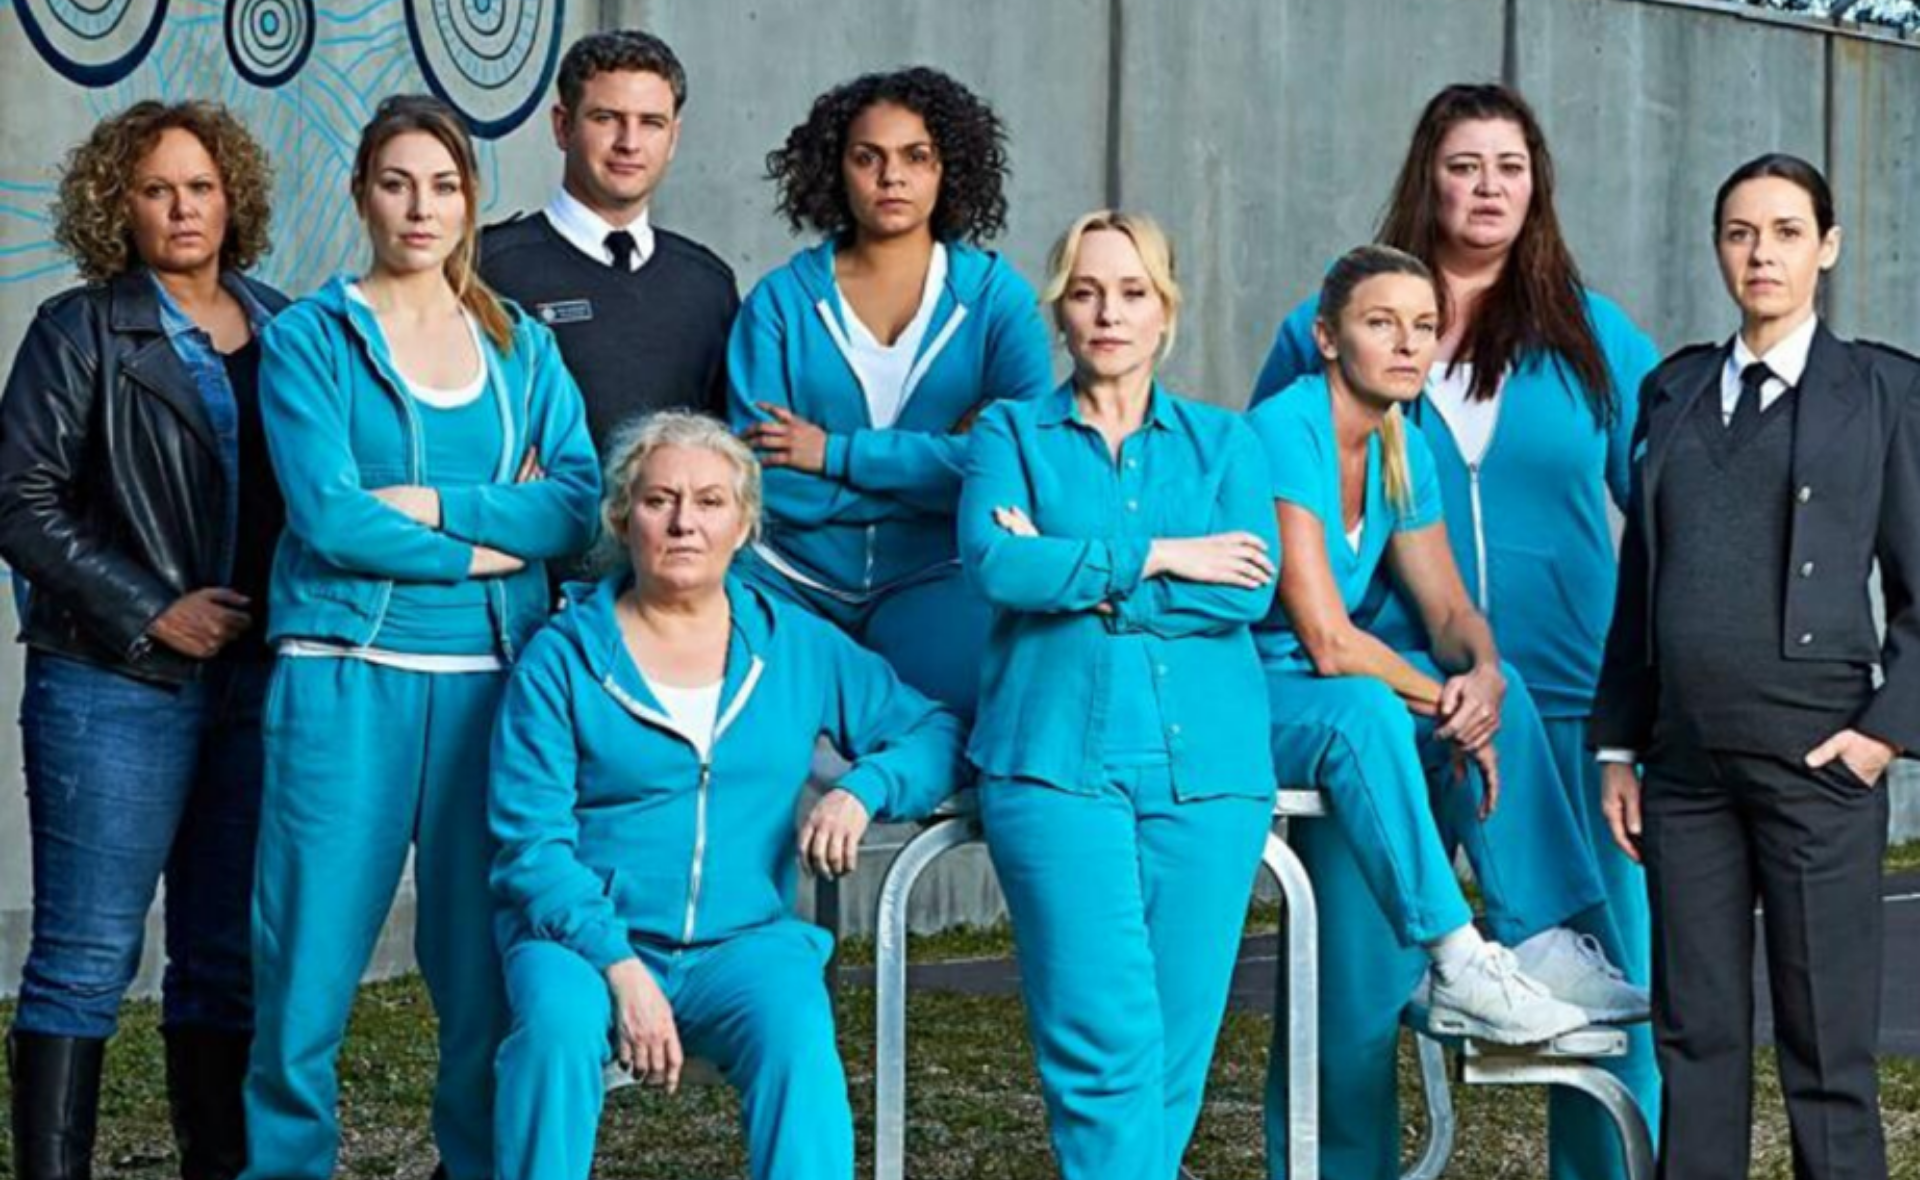 Teal Tuesdays are back! Wentworth confirms the premiere date for its final season with an exciting new teaser